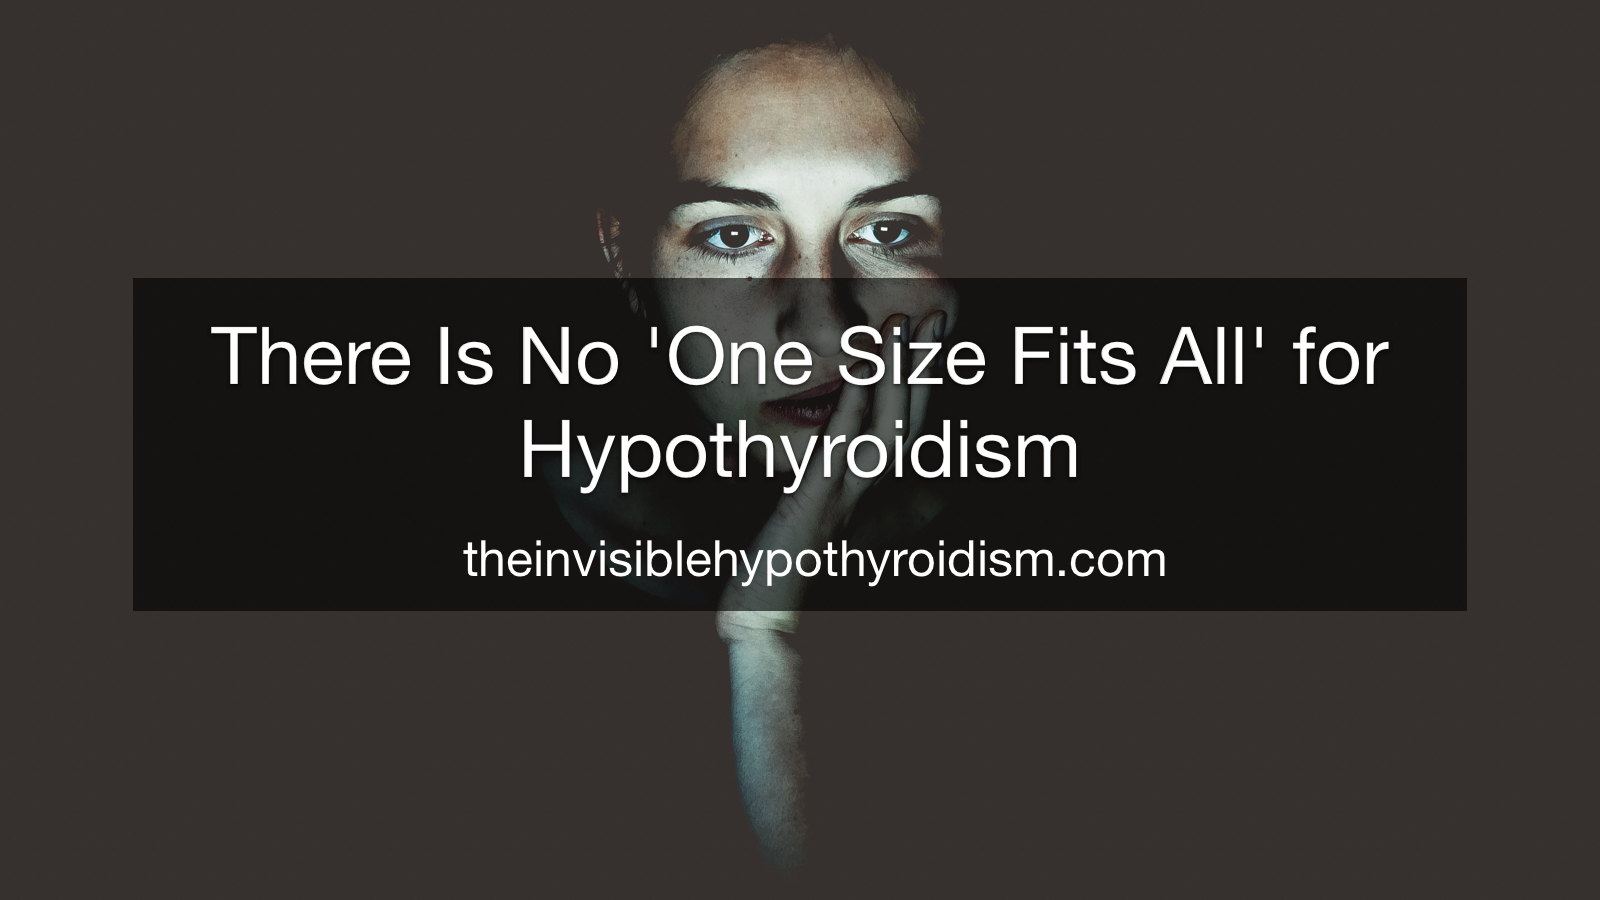 There Is No 'One Size Fits All' for Hypothyroidism